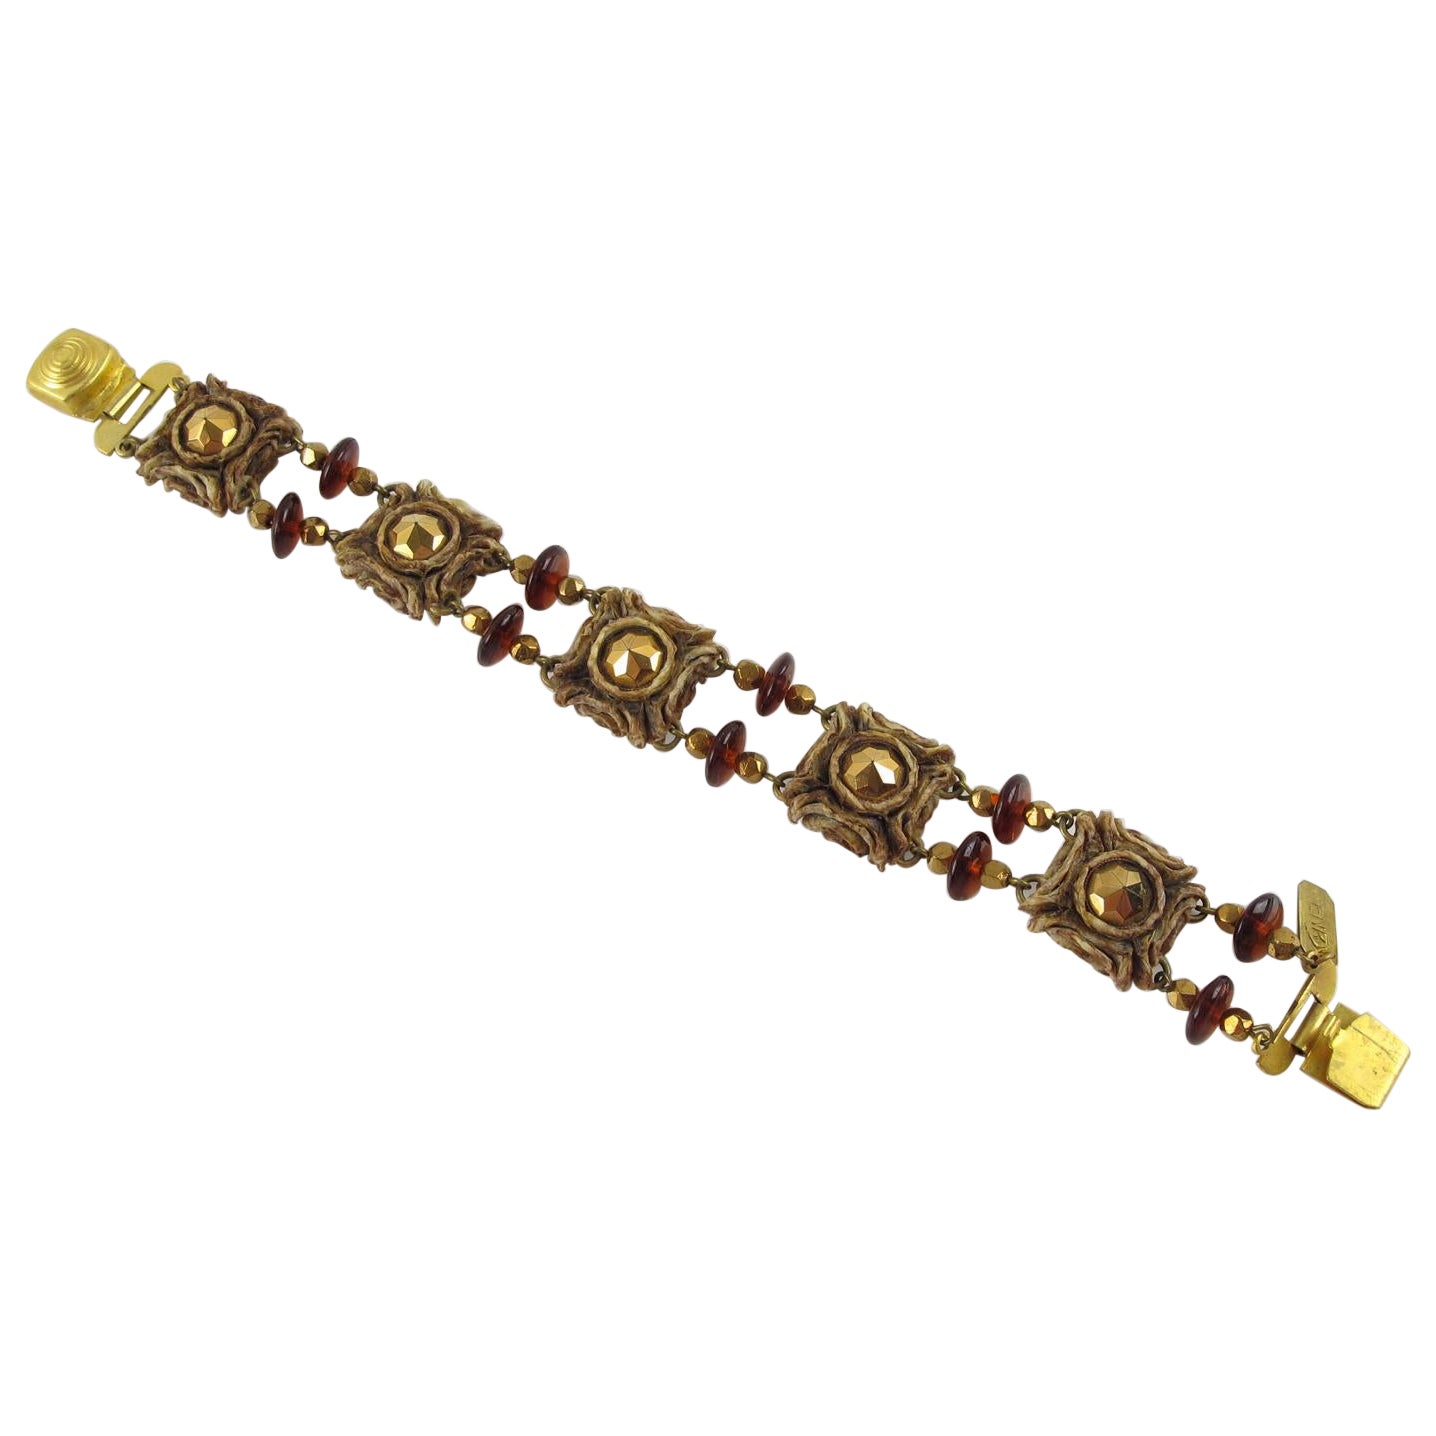 Henry Perichon Talosel Resin Link Bracelet with Glass Beads For Sale